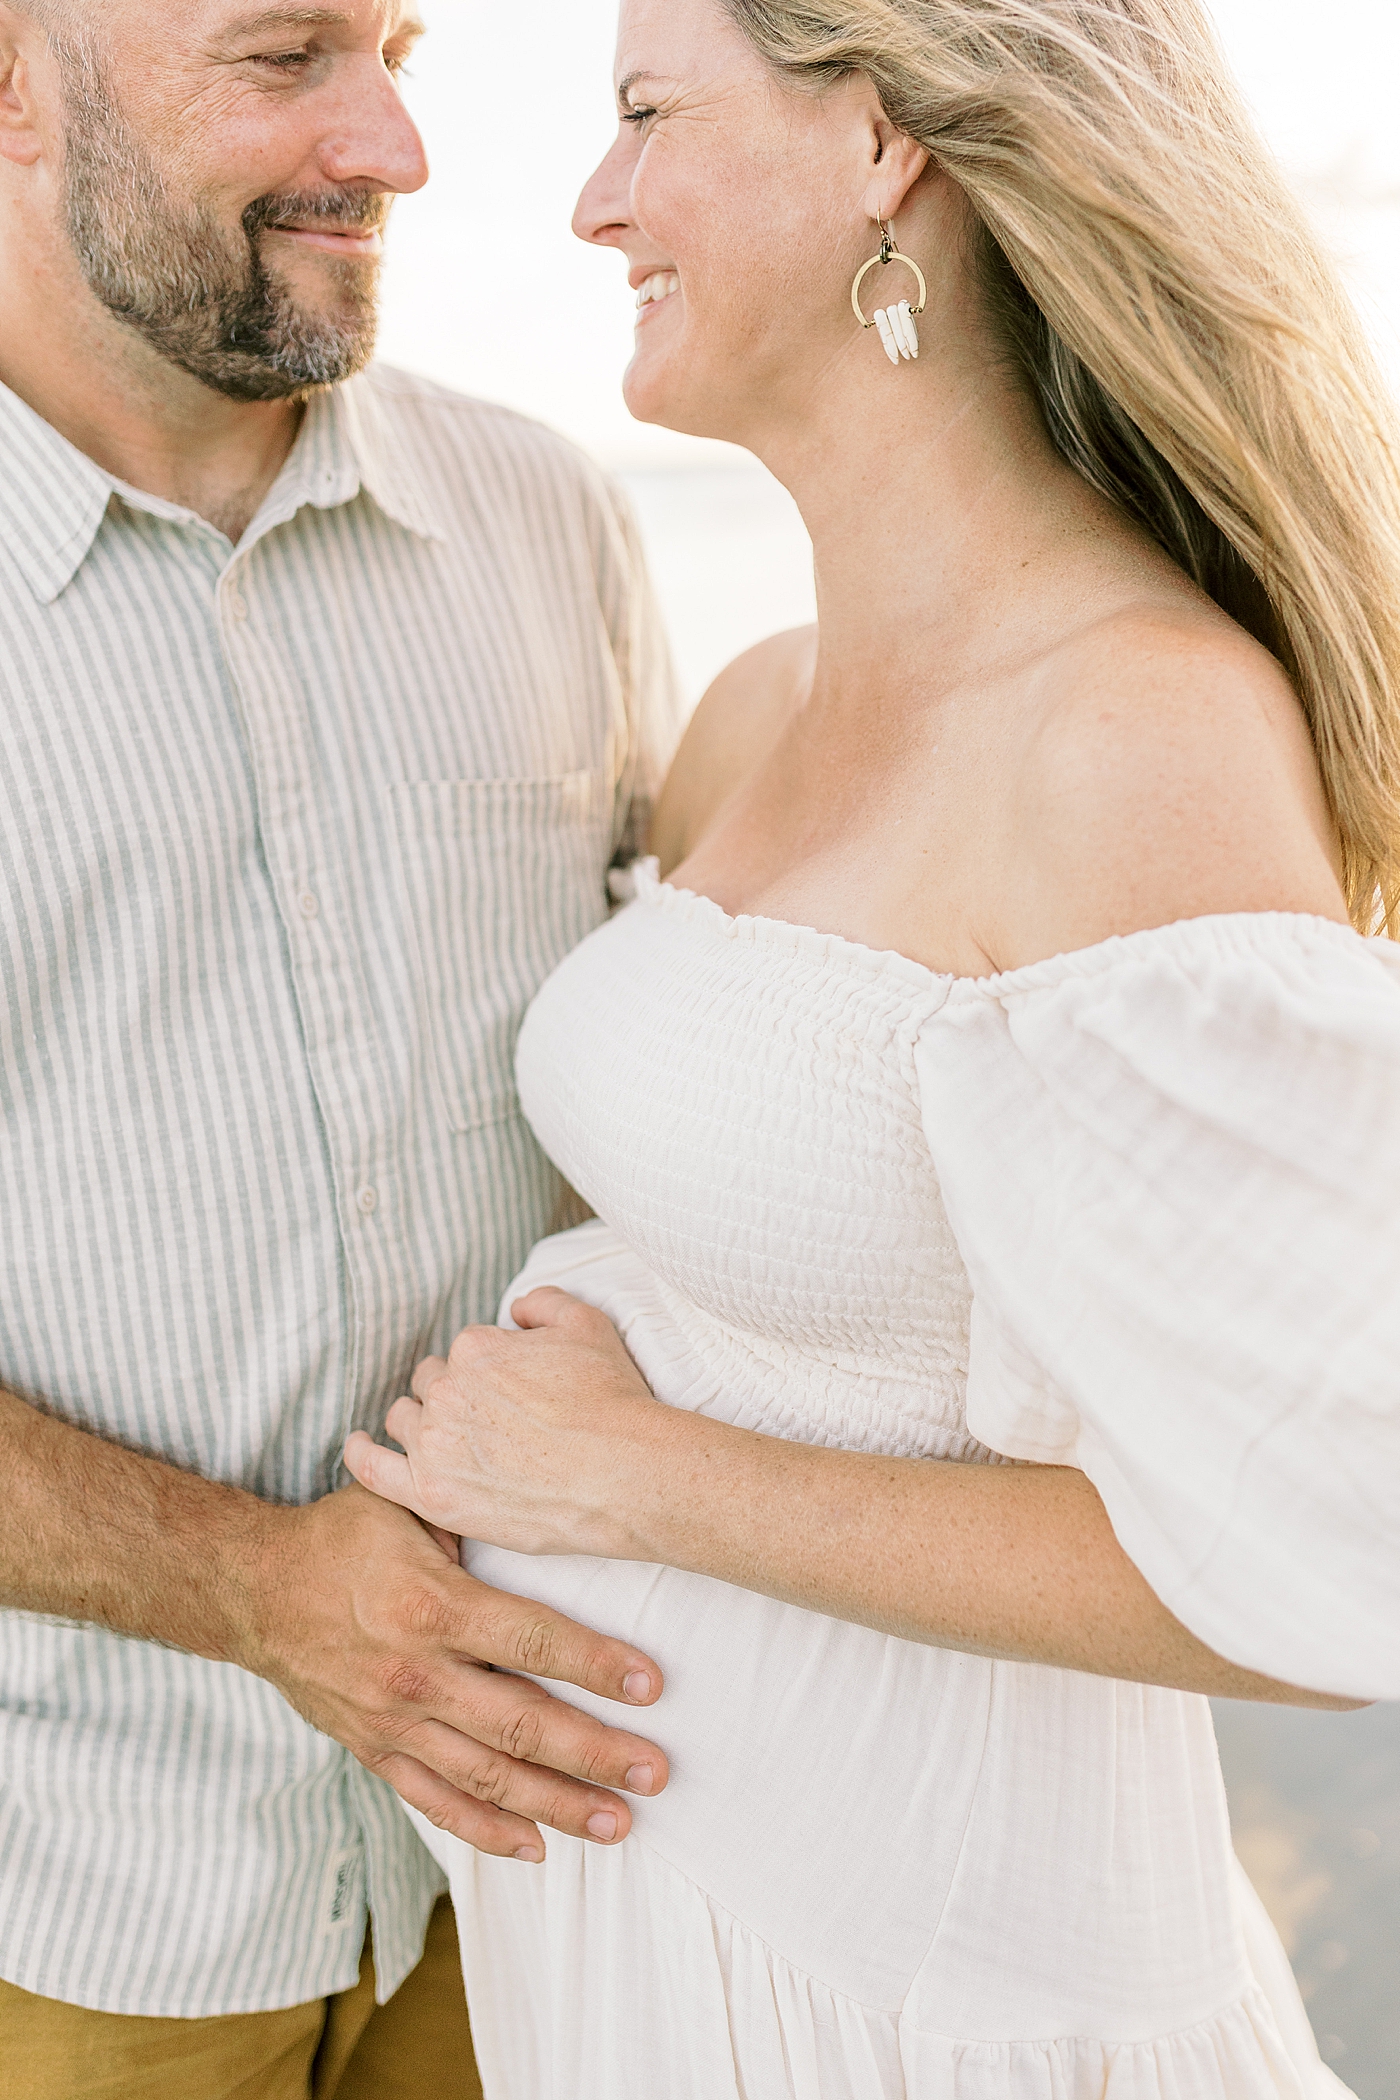 Detail of mom and dad to be holding mom's belly | Image by Caitlyn Motycka